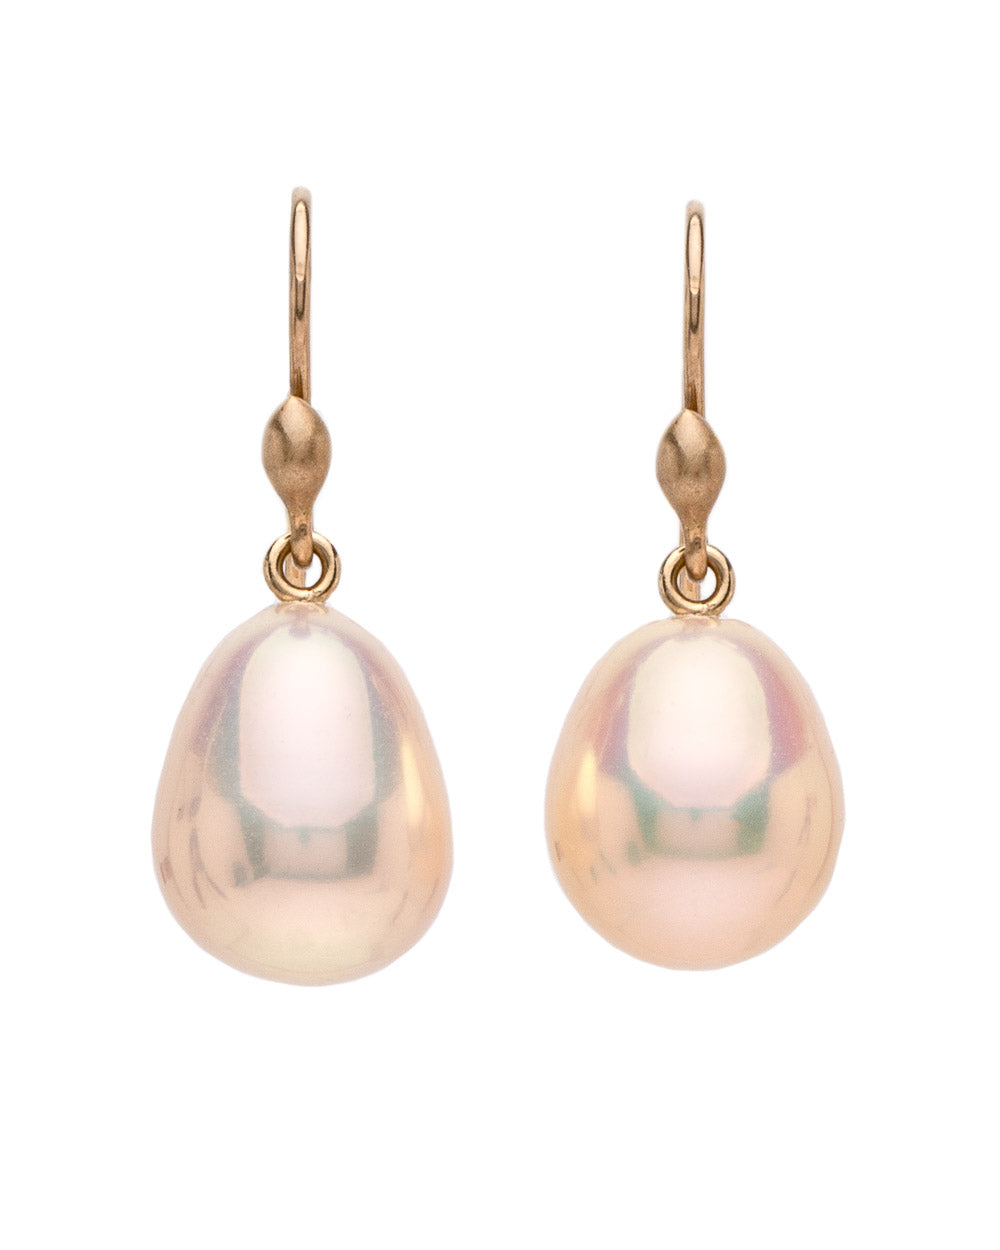 Chinese Freshwater Baroque White Pearl Earrings